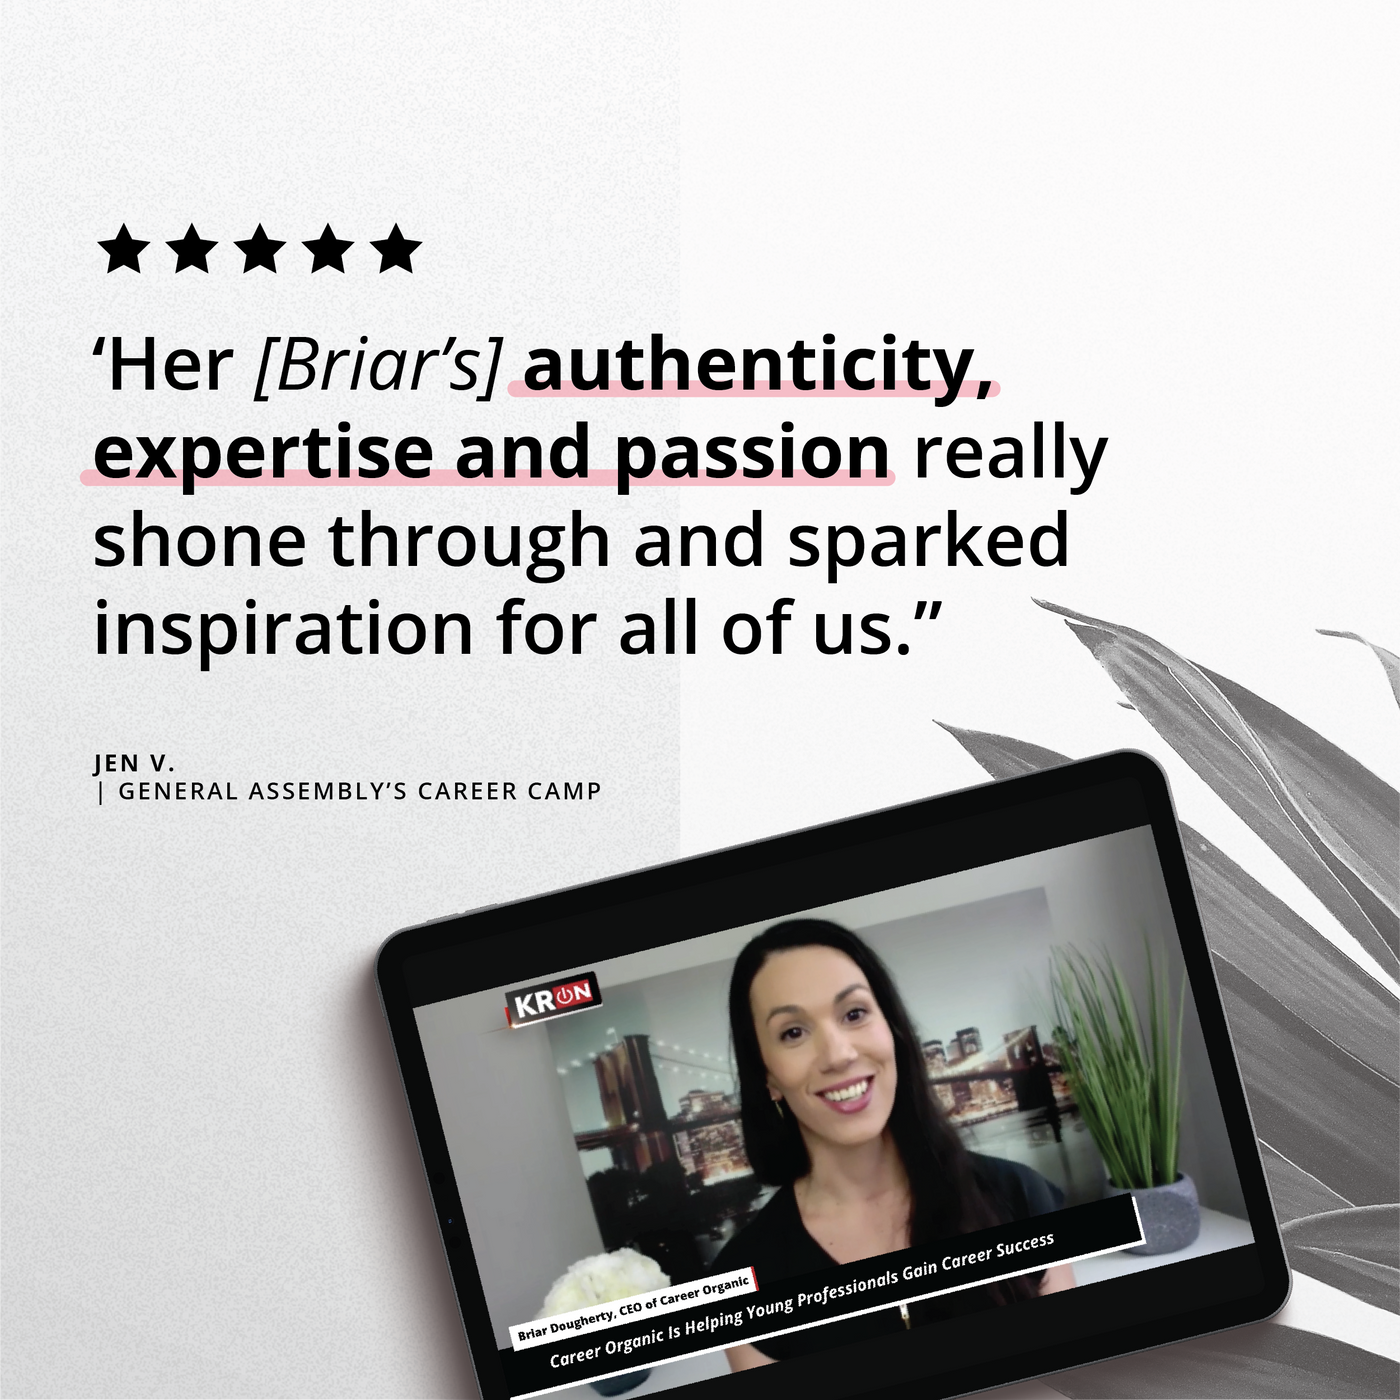 ipad screen on a black and white background with plant photography, an interview of a dark haired female on screen with testimonial quote above